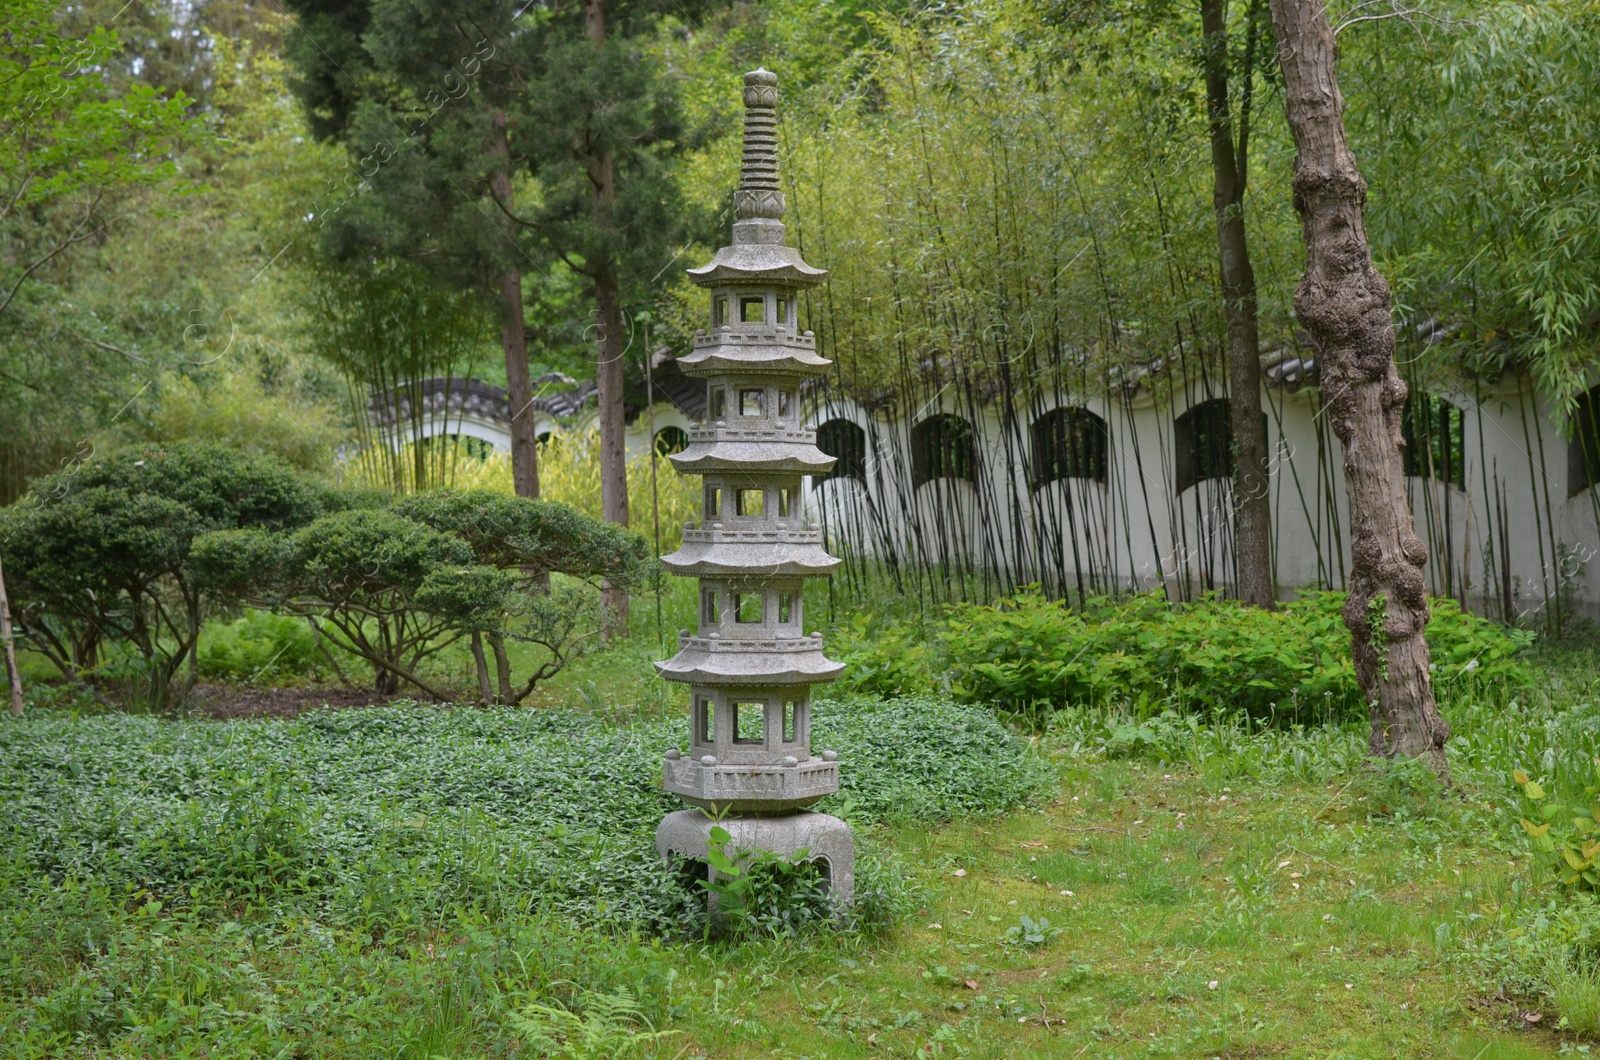 Photo of Stone Japanese pagoda sculpture on green grass in park